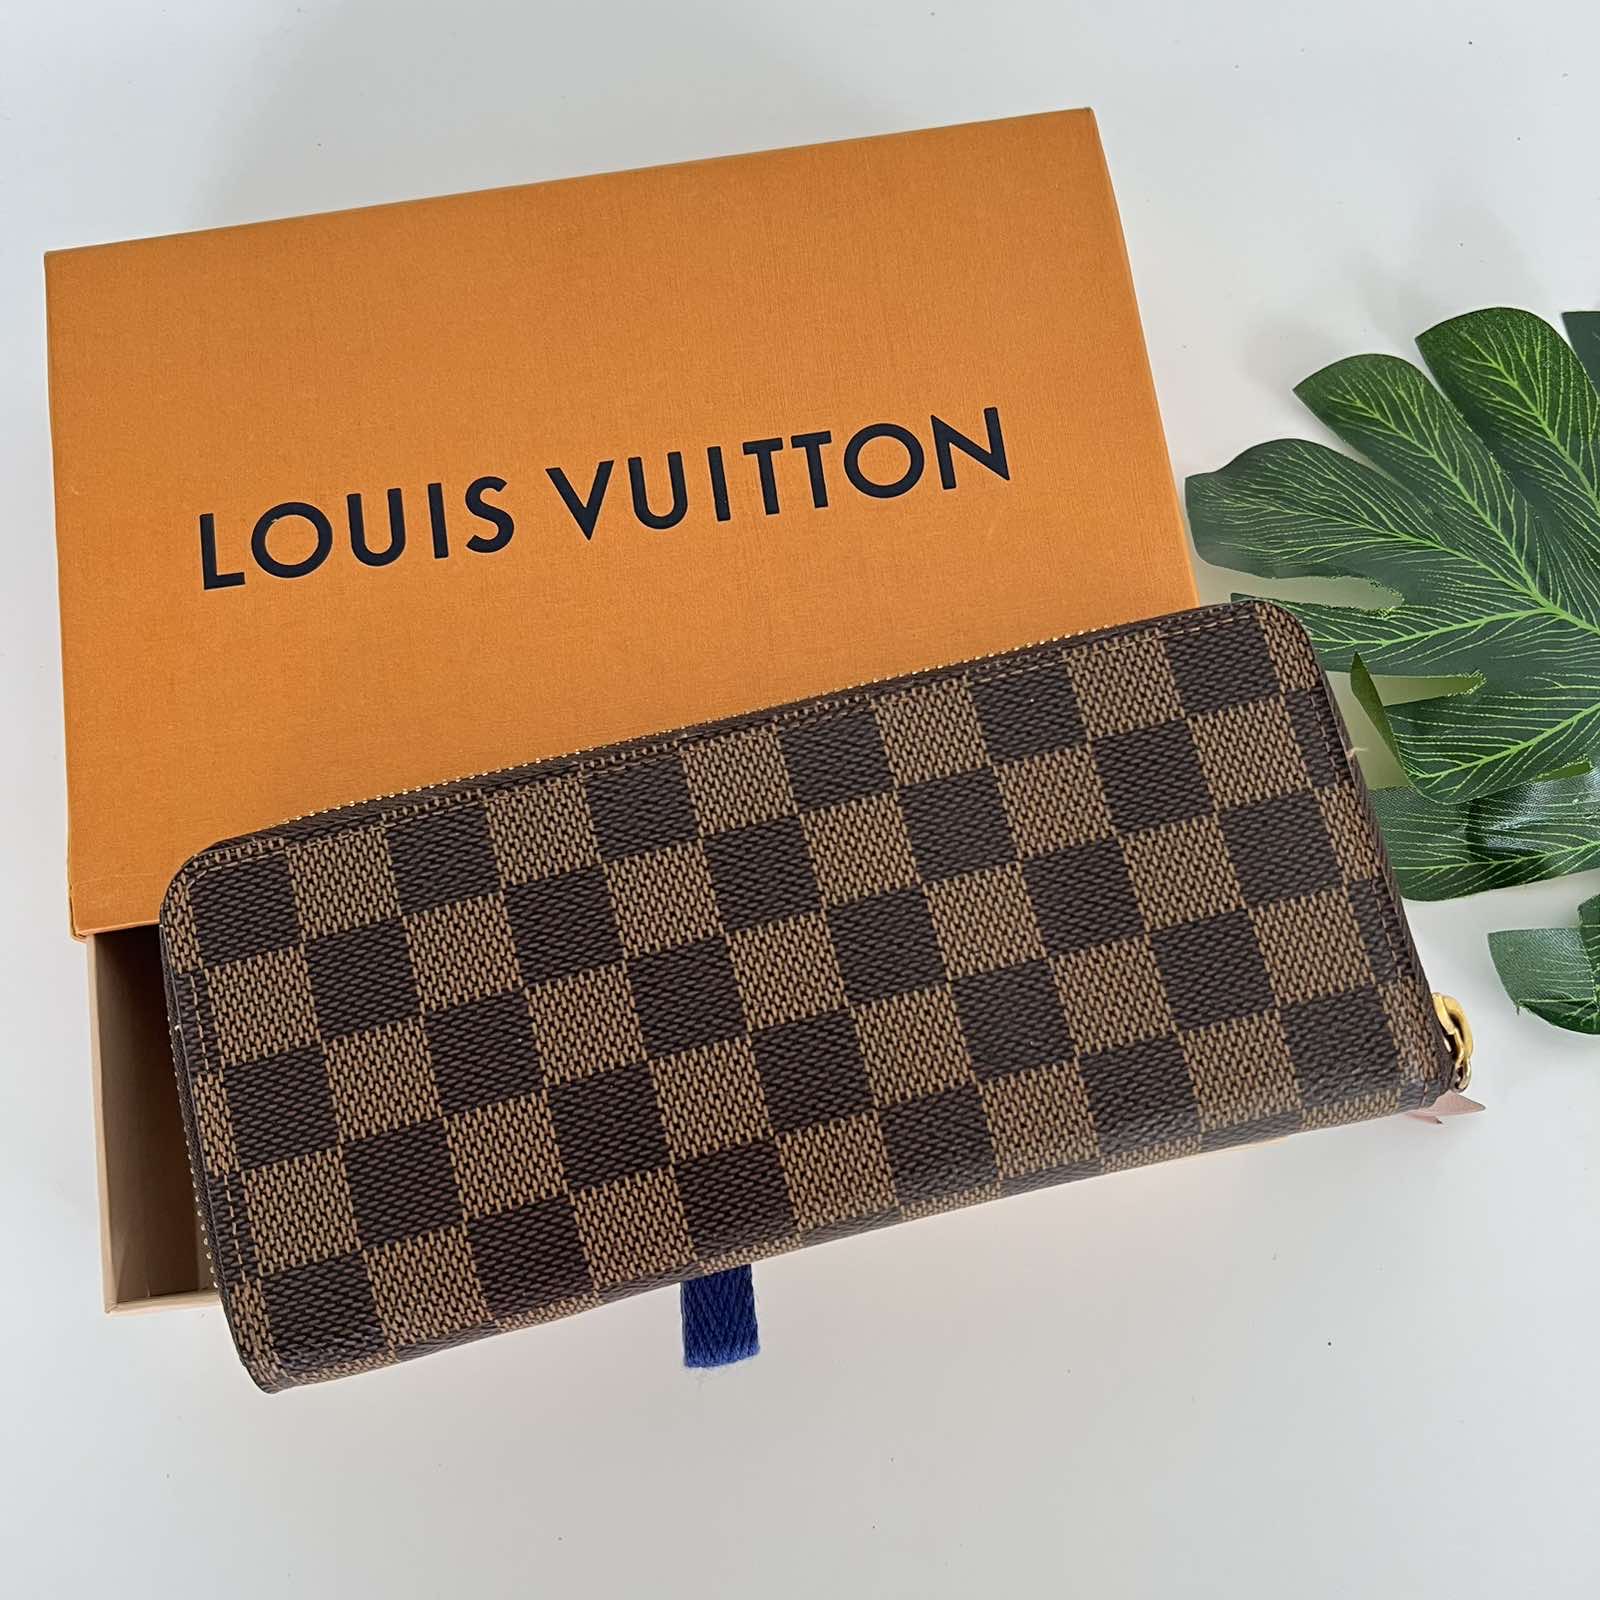 Louis Vuitton Damier Ebene Clemence Wallet Light Pink Interior. DC: SF3270.  Made in France. With care card, receipt, dustbag, ribbon, box & certificate  of authenticity from ENTRUPY ❤️ - Canon E-Bags Prime